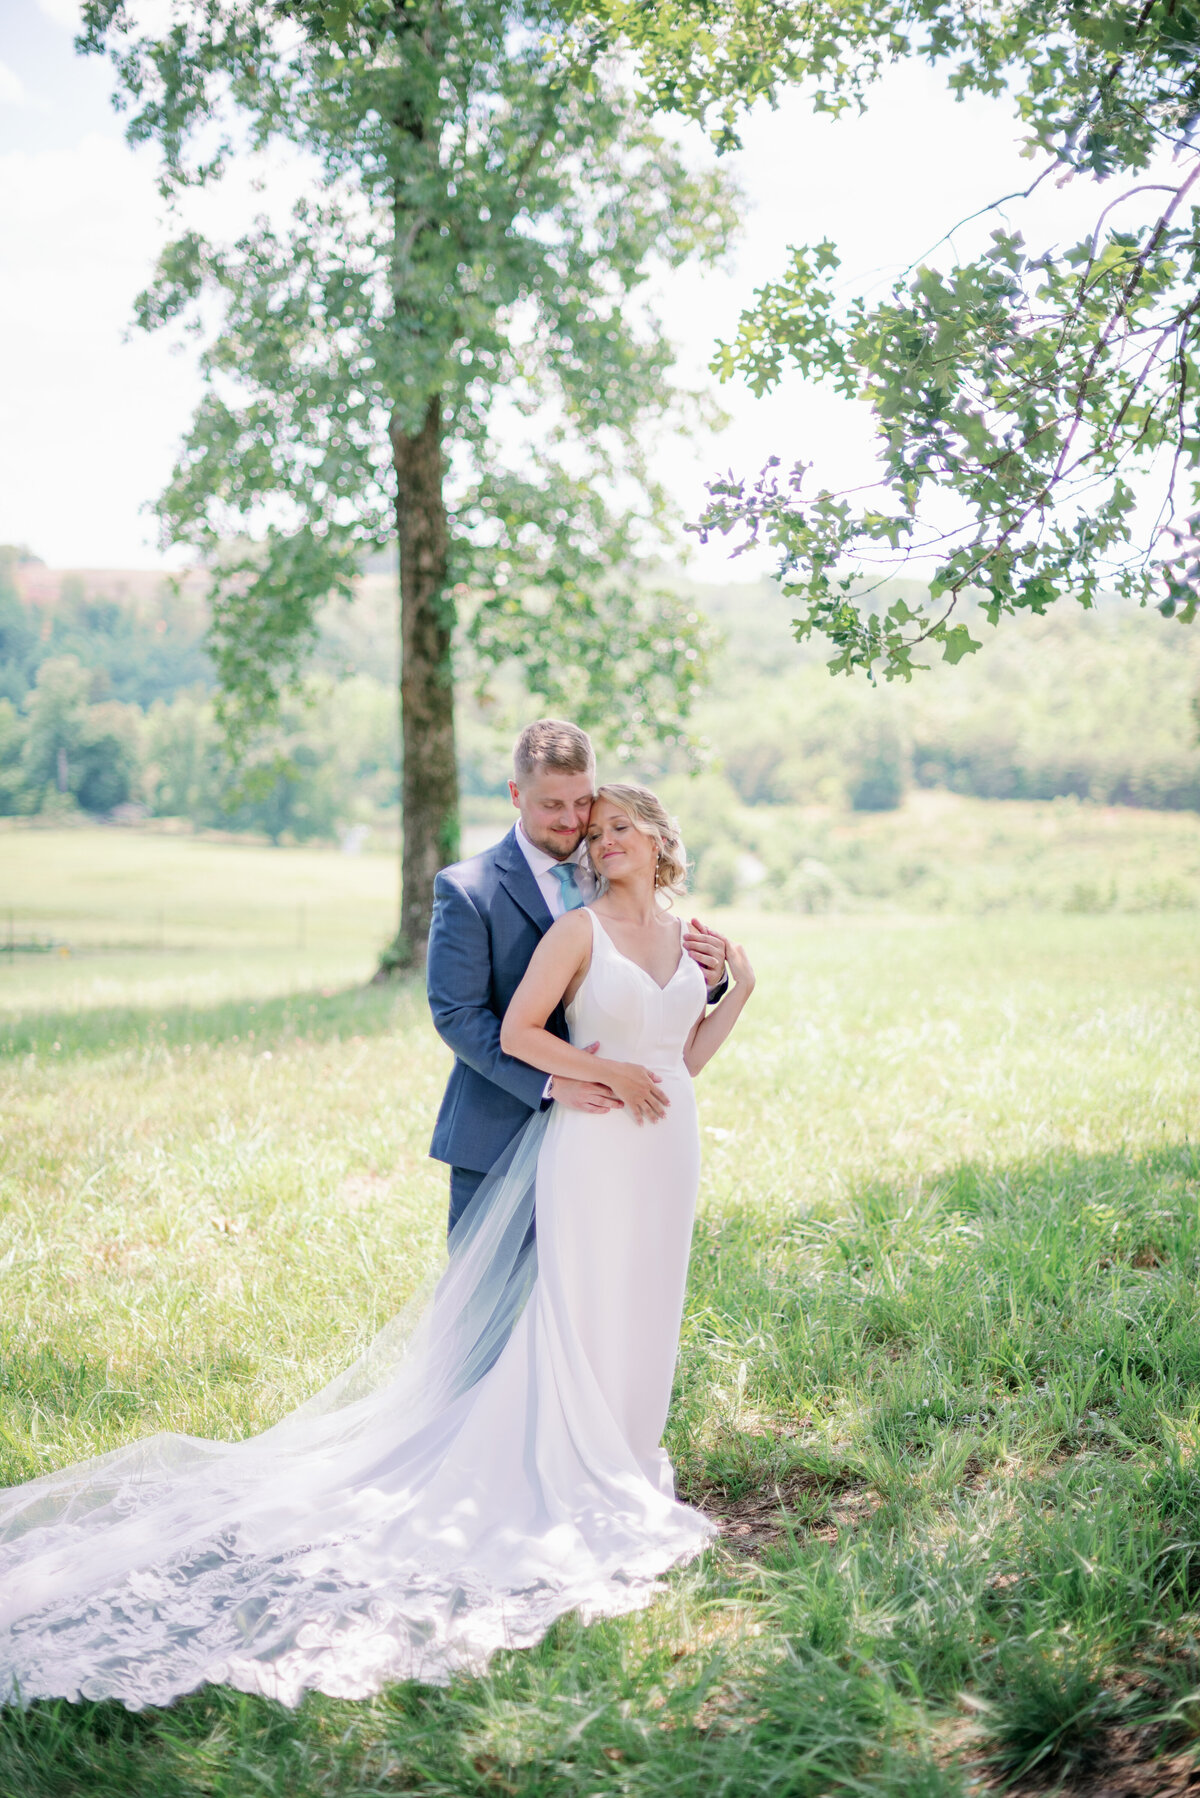 Farm wedding venues near Greenville South Carolina photographed by light and airy Greenville SC wedding photographer